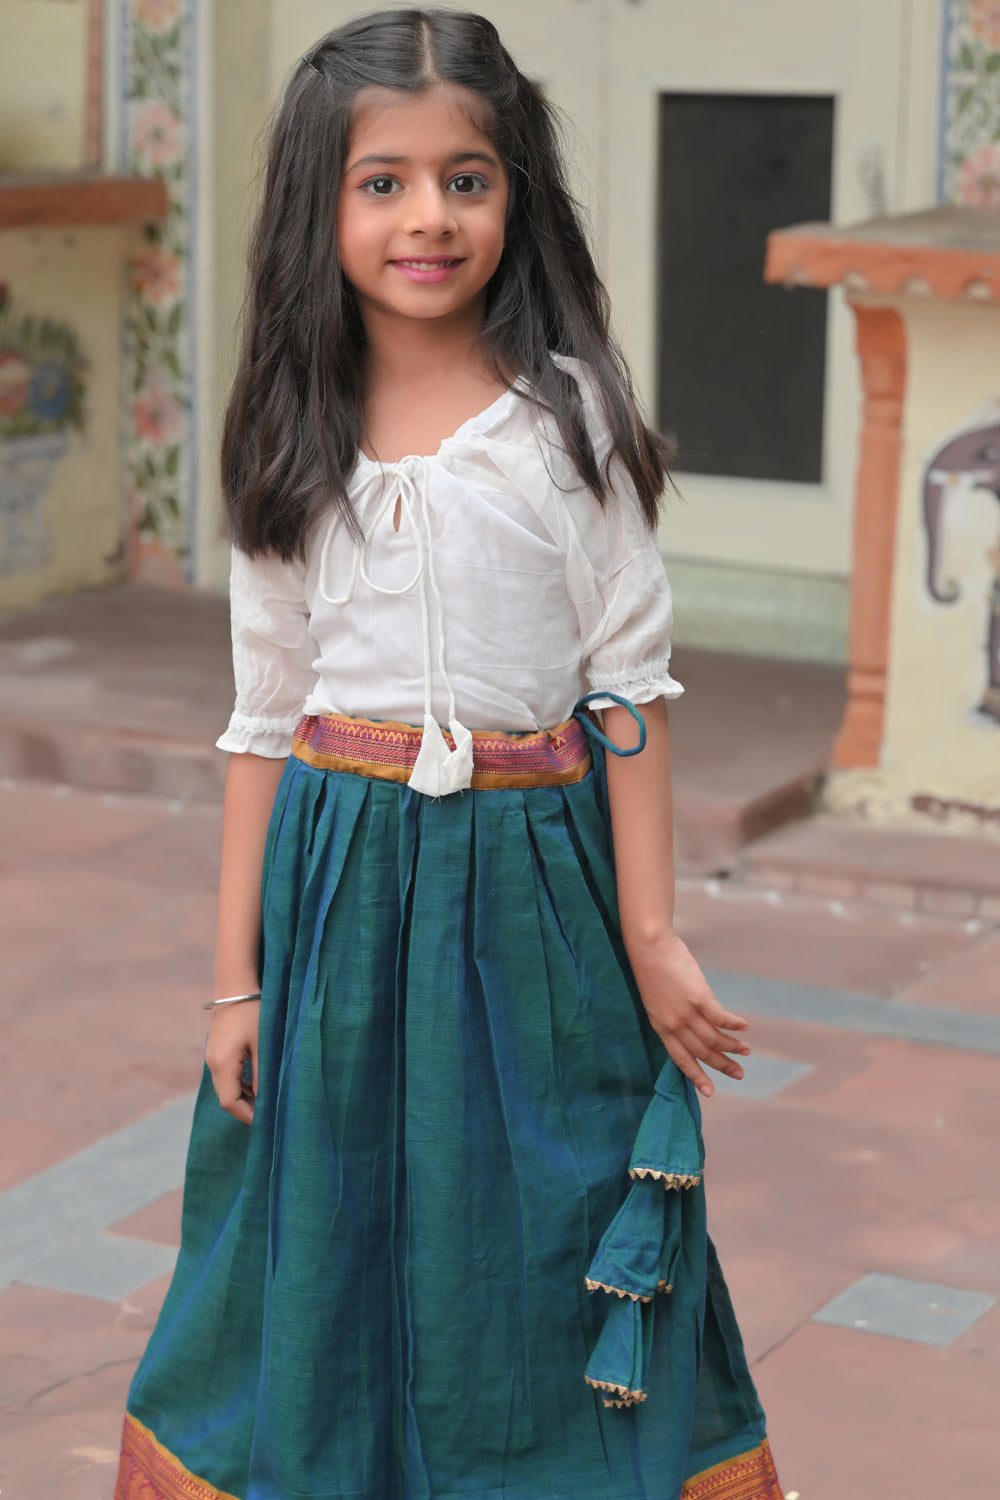 Moor Hues Pleated skirt and top for Girls |  Custom Shirt Made To Order